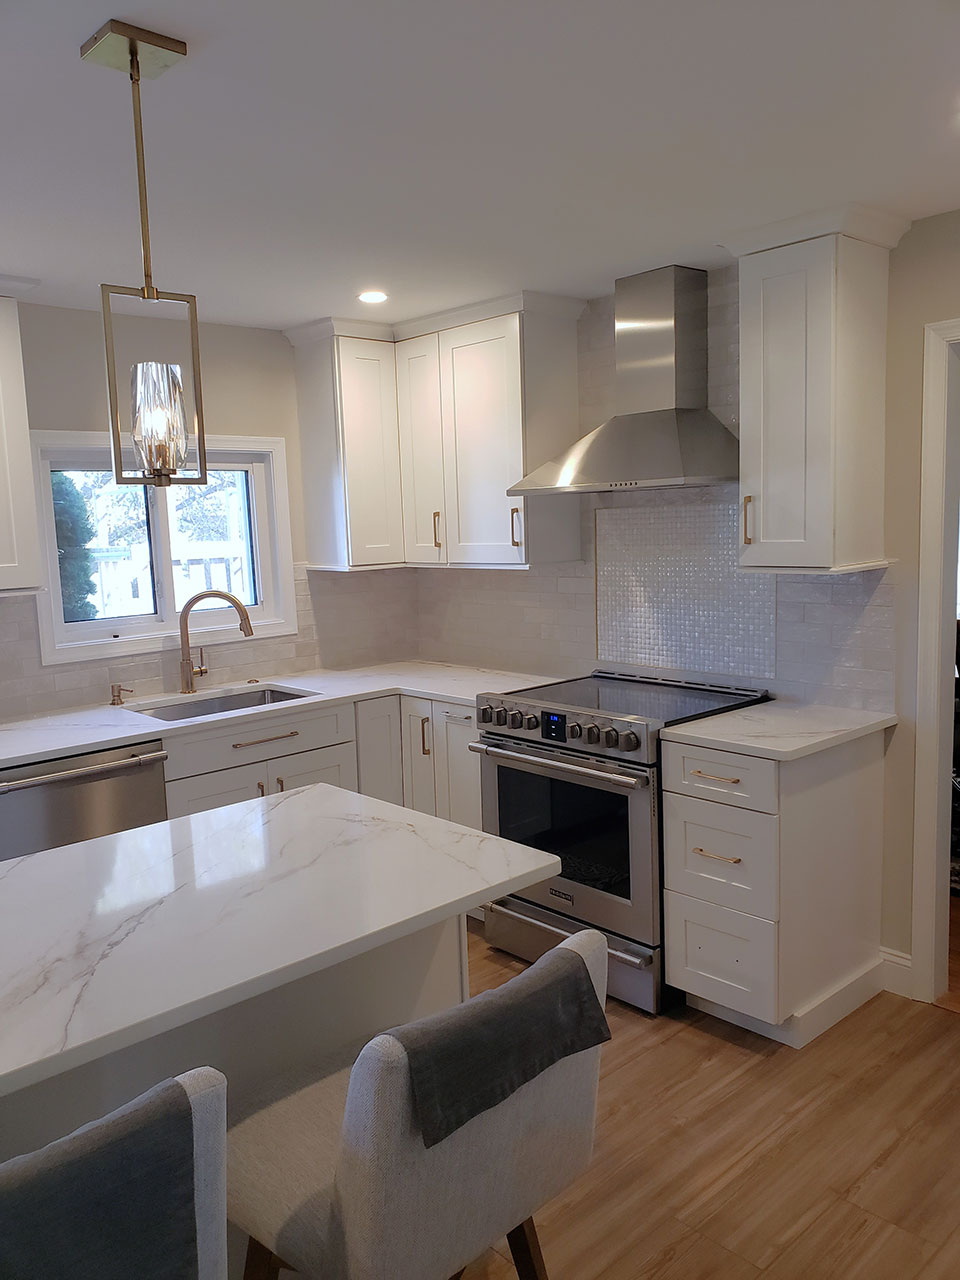 Knightswood Rd Kitchen and Family Room Remodel